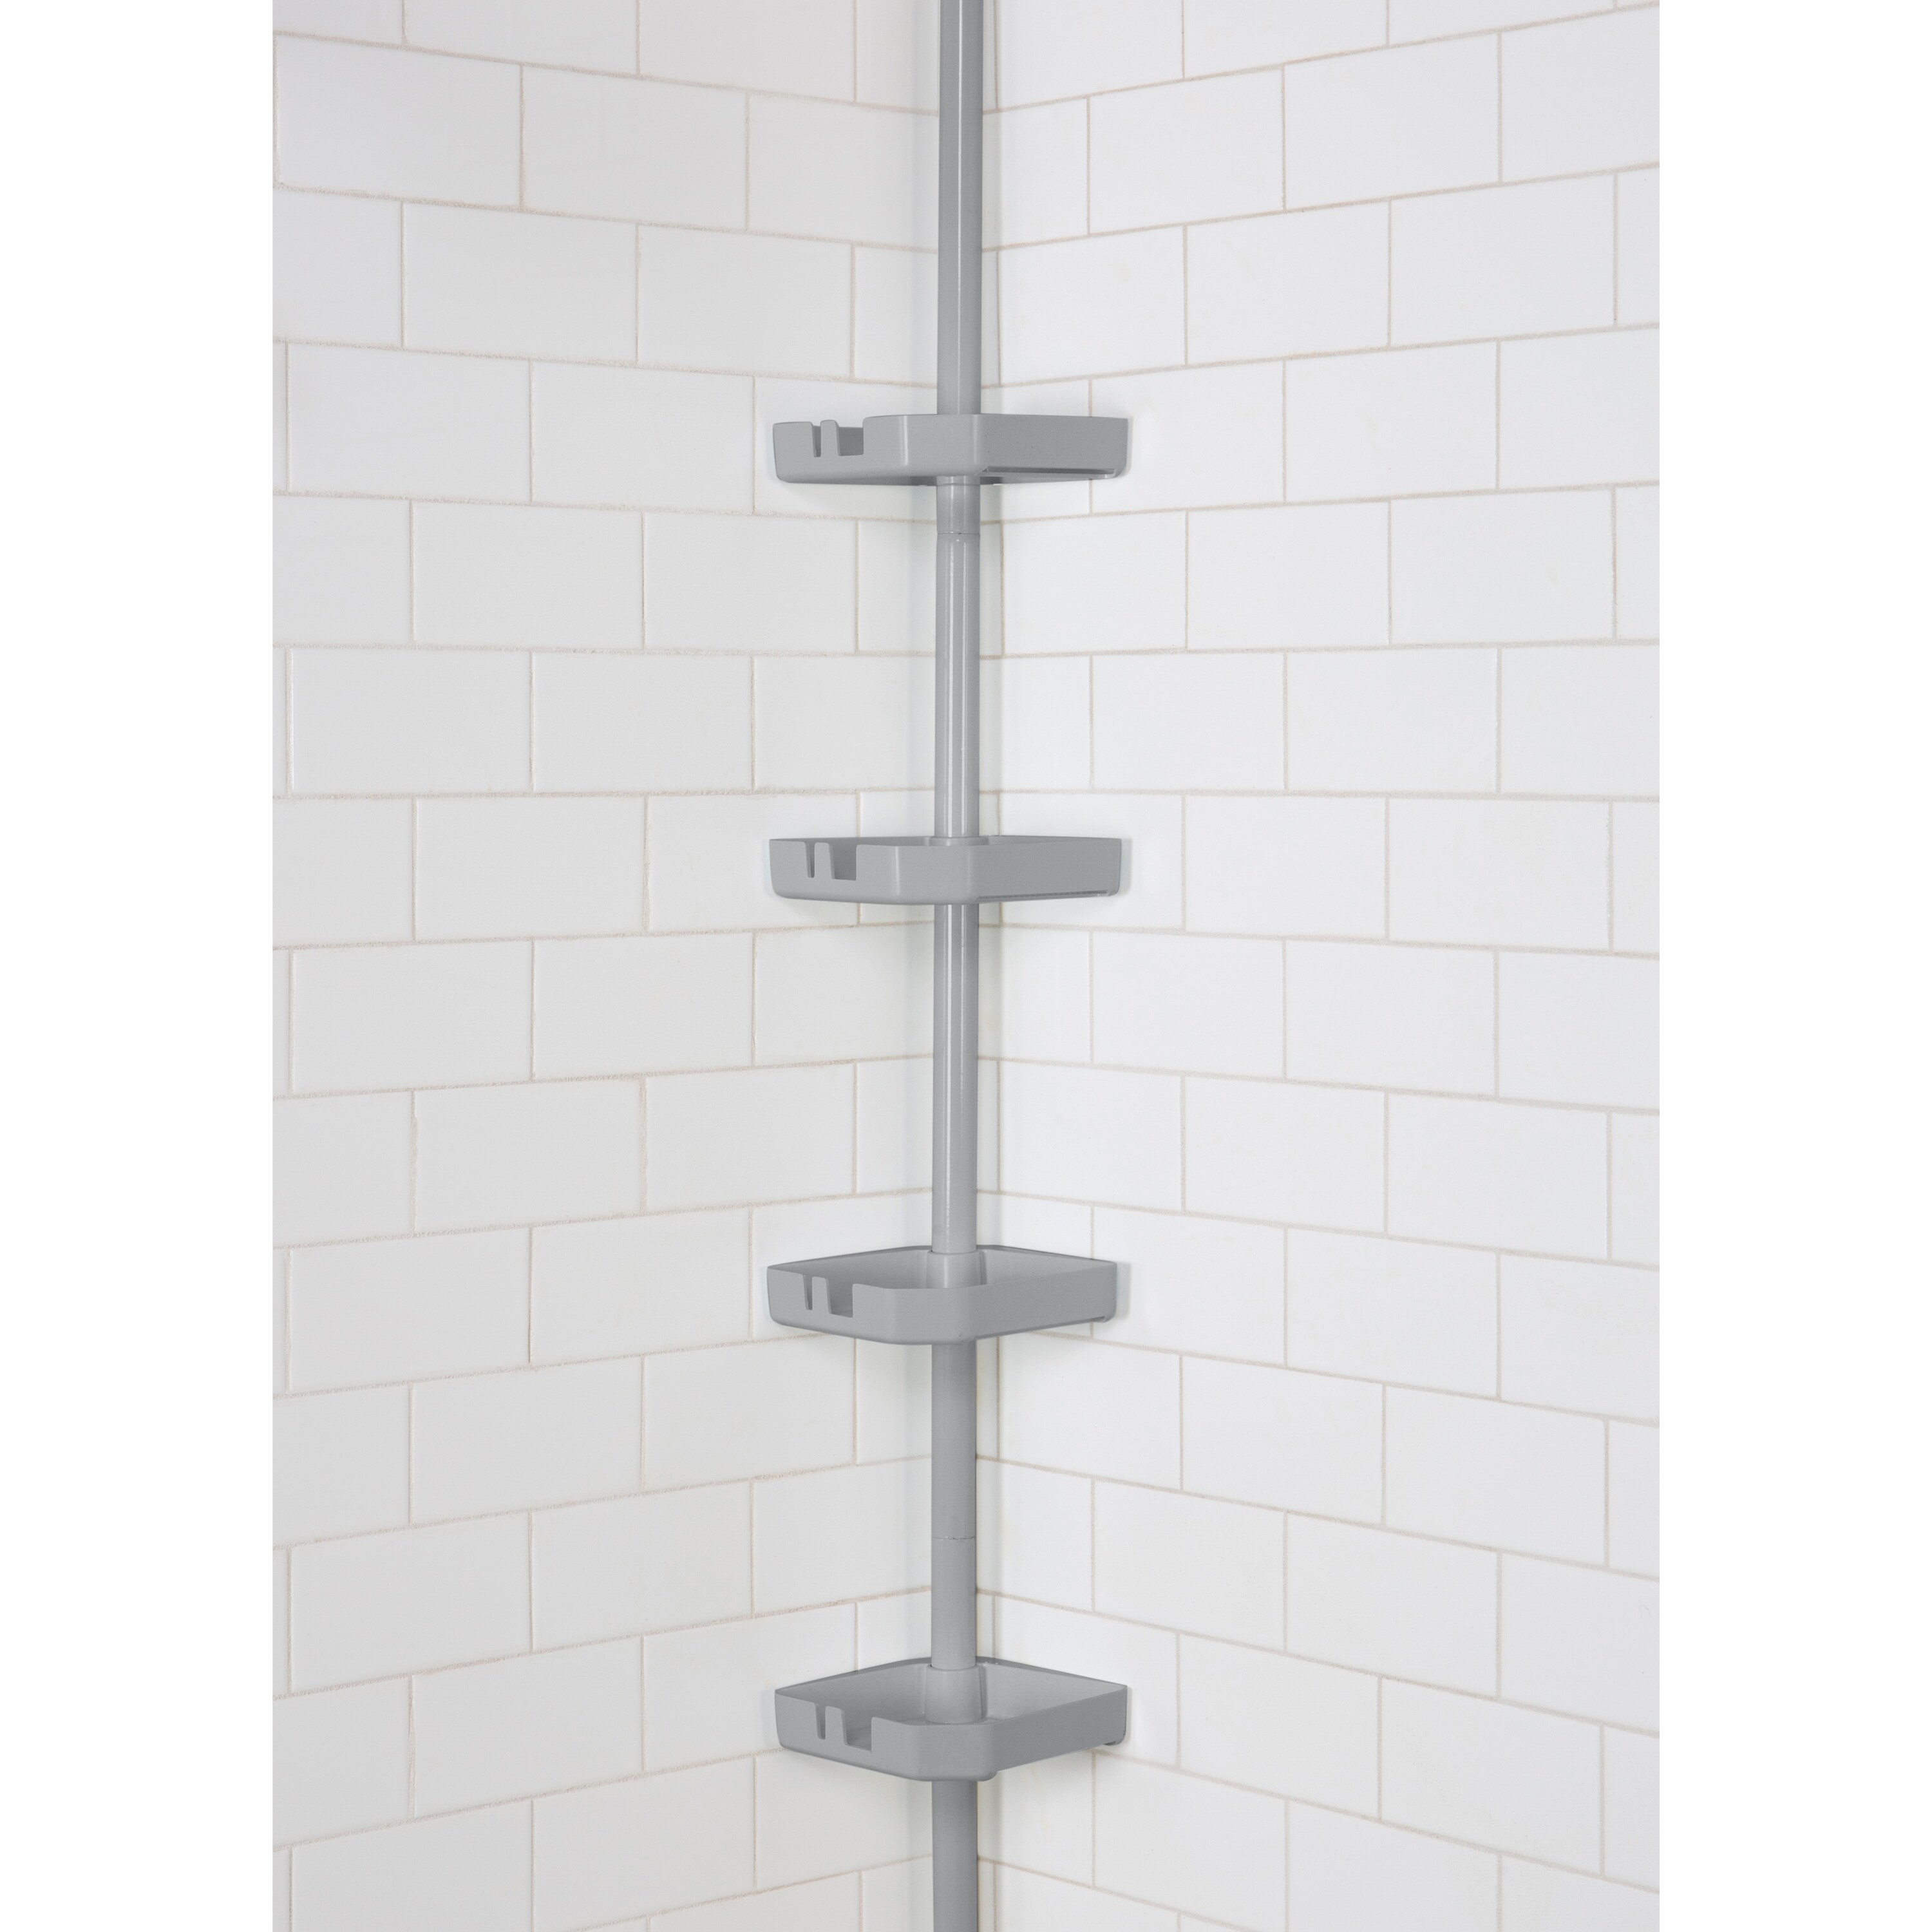 https://ak1.ostkcdn.com/images/products/is/images/direct/a54326a2fa32defb11096e07e66f29be71ab929f/Bath-Bliss-4-Tier-Tension-Corner-Shower-Organizer-Caddy-in-Grey.jpg